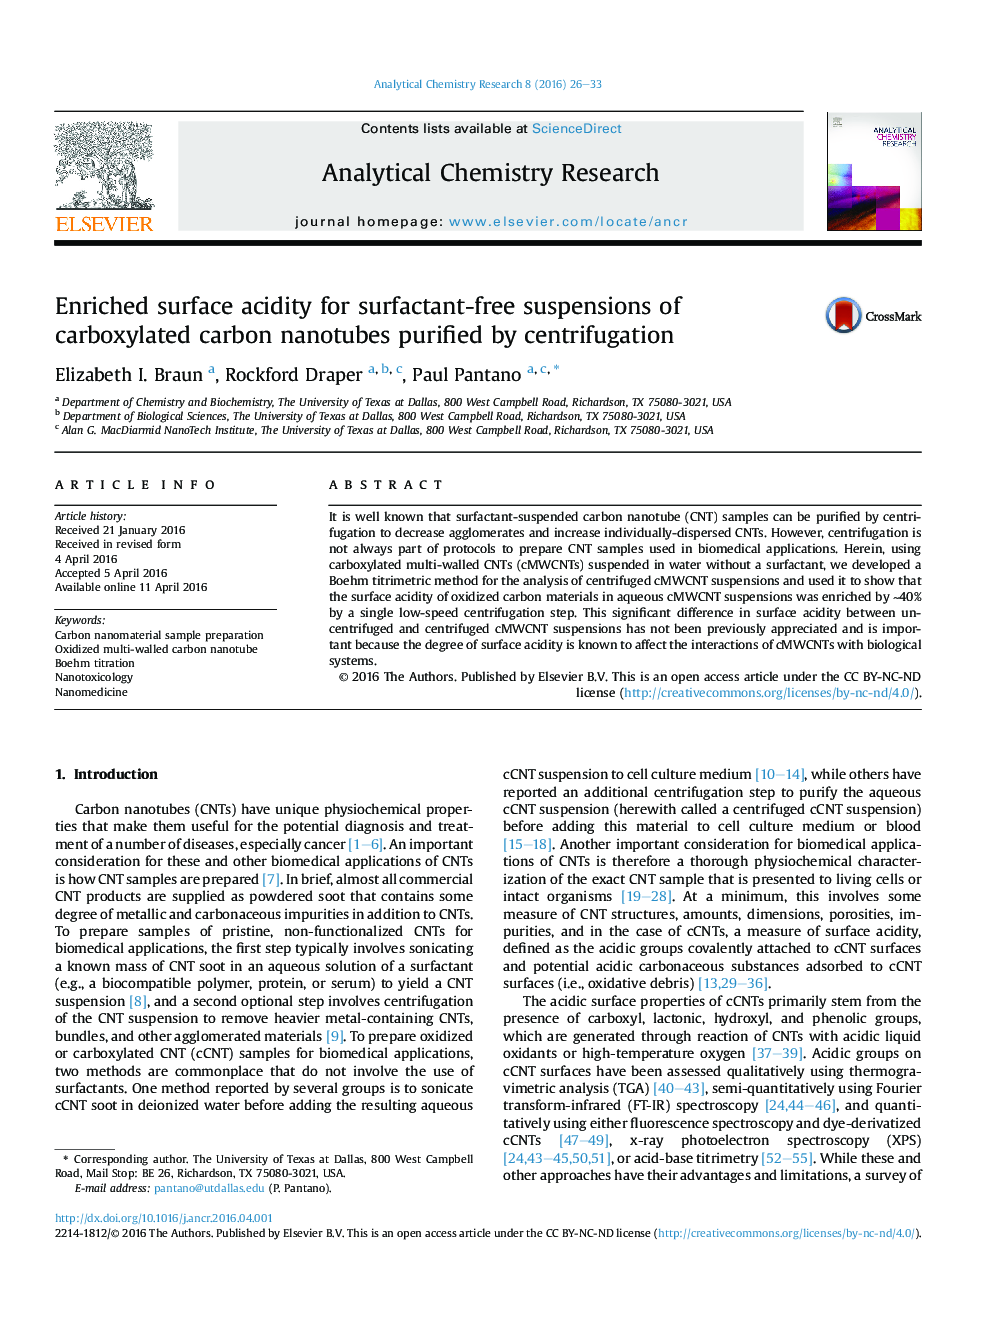 Enriched surface acidity for surfactant-free suspensions of carboxylated carbon nanotubes purified by centrifugation